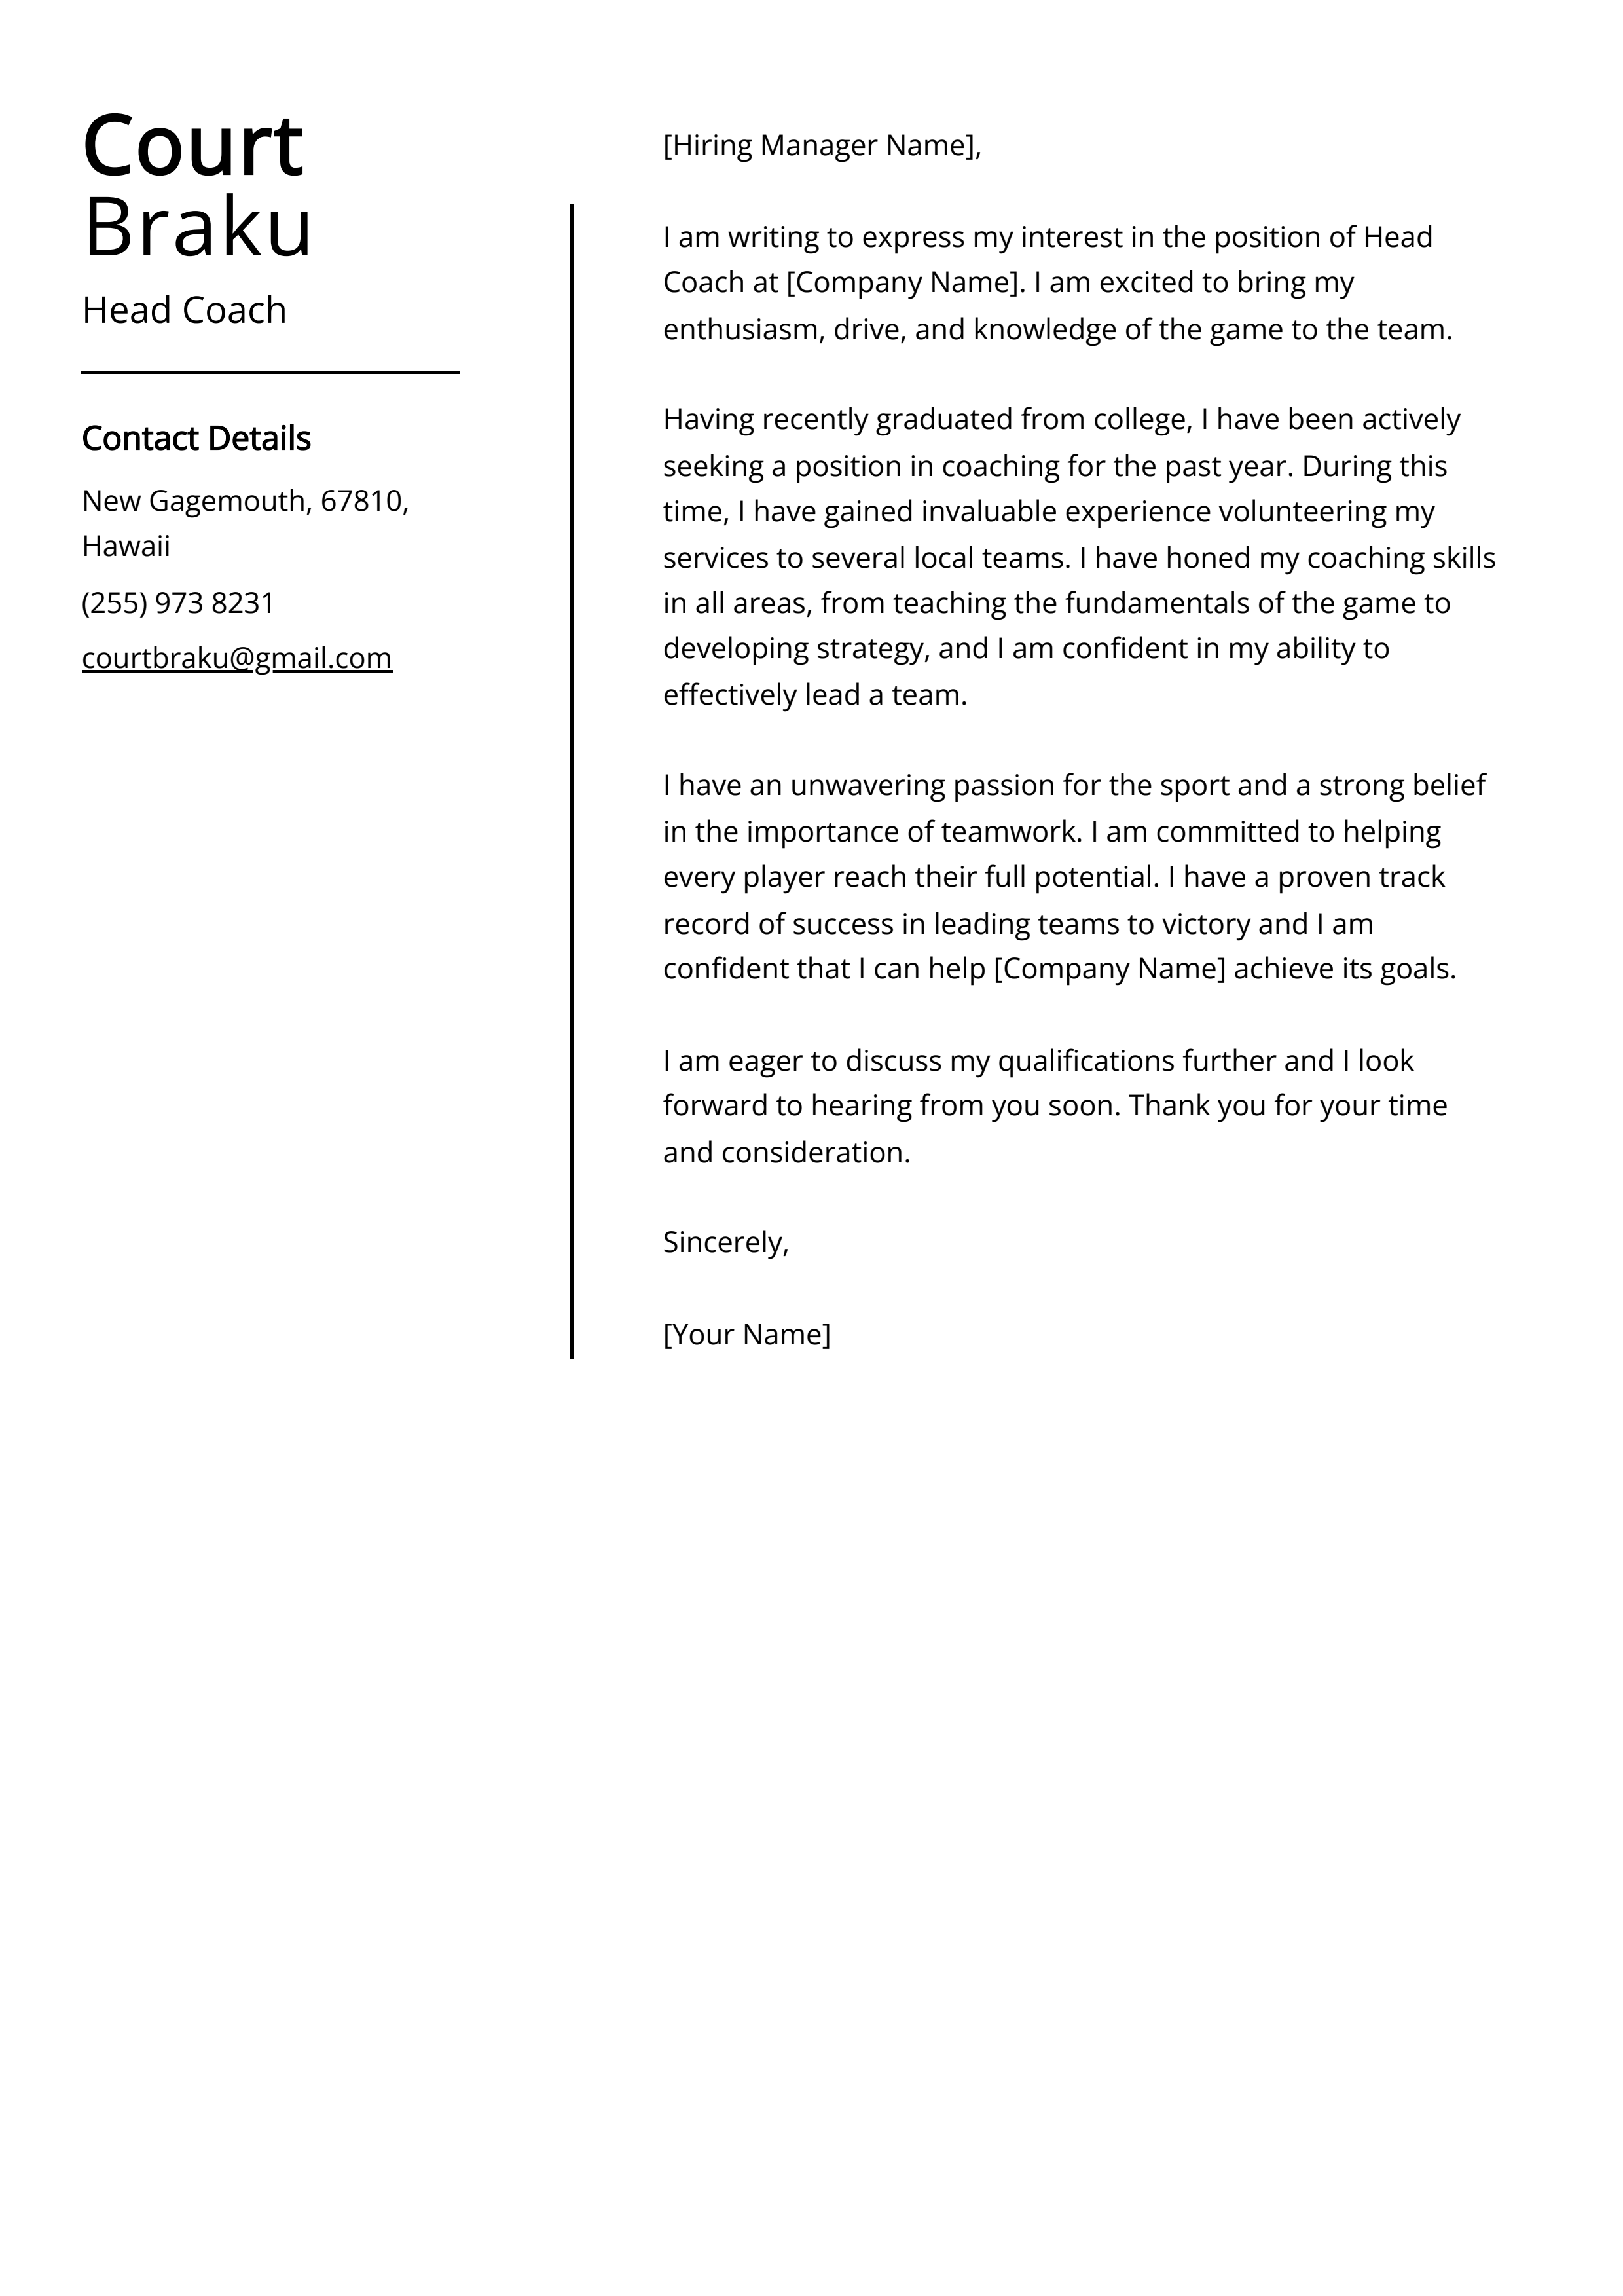 Head Coach Cover Letter Example